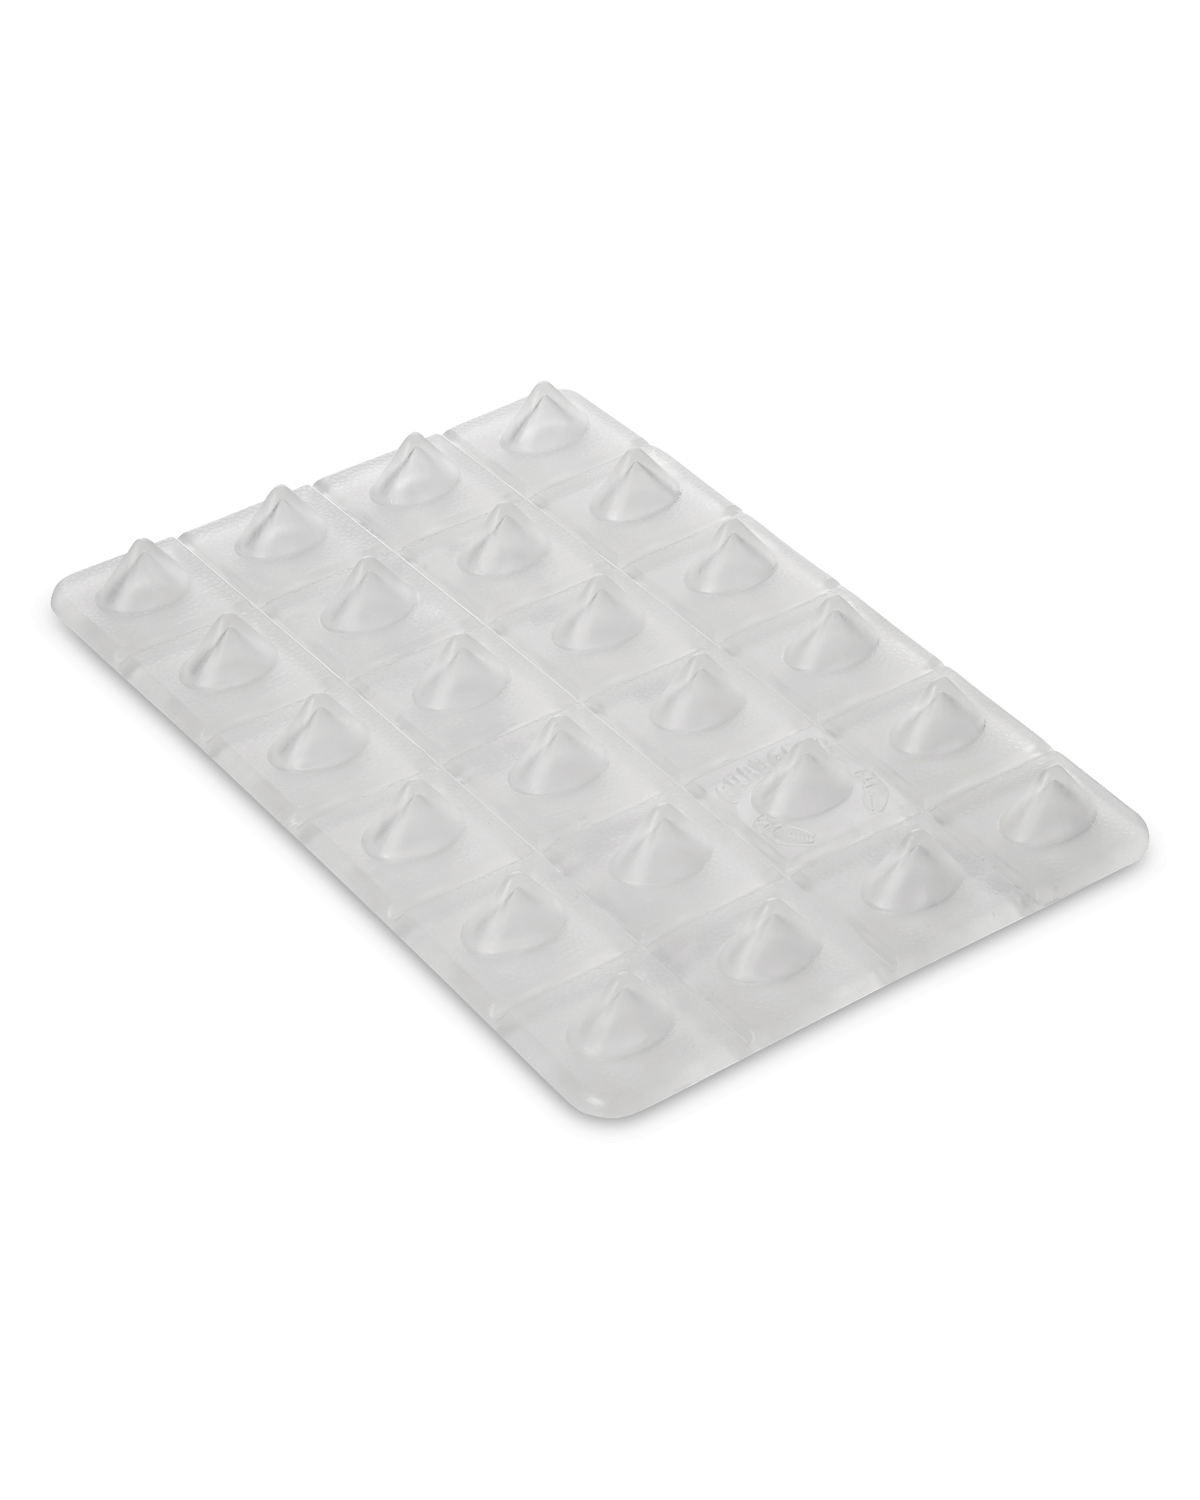 Clear Snowboard Stomp Pad Rectangle